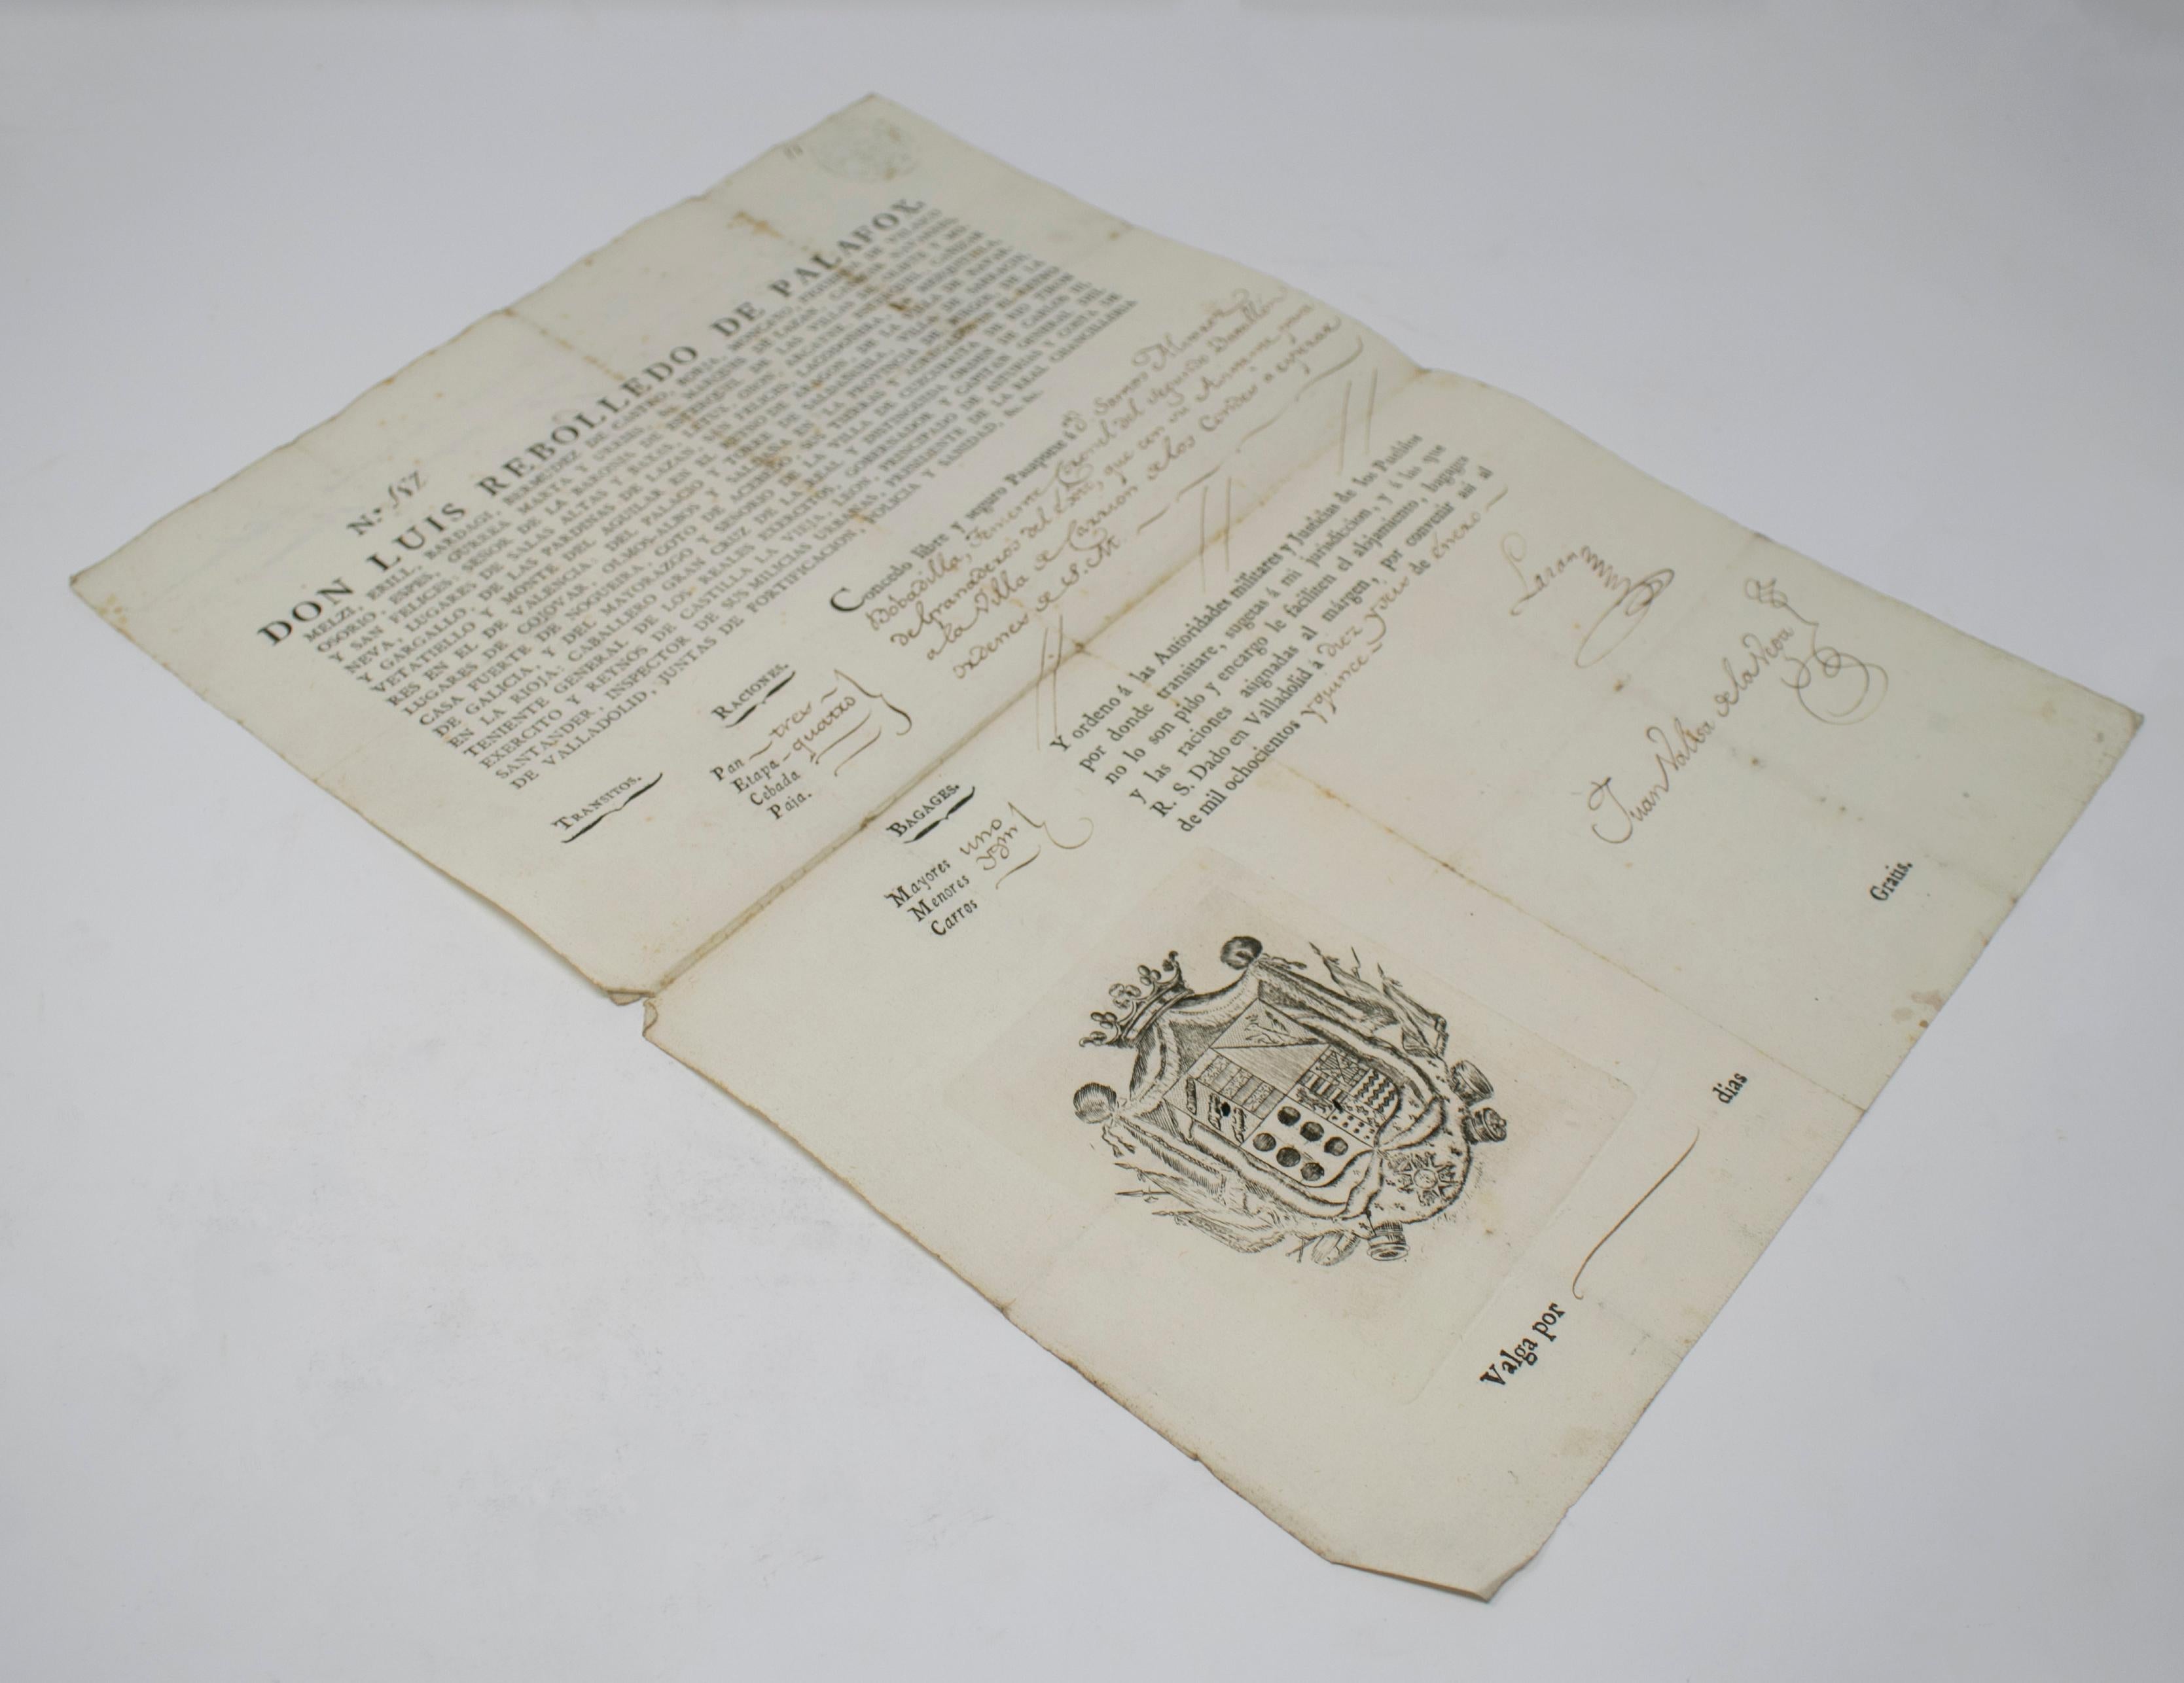 1815 Spanish passport hand written on paper. Part of a large collection.